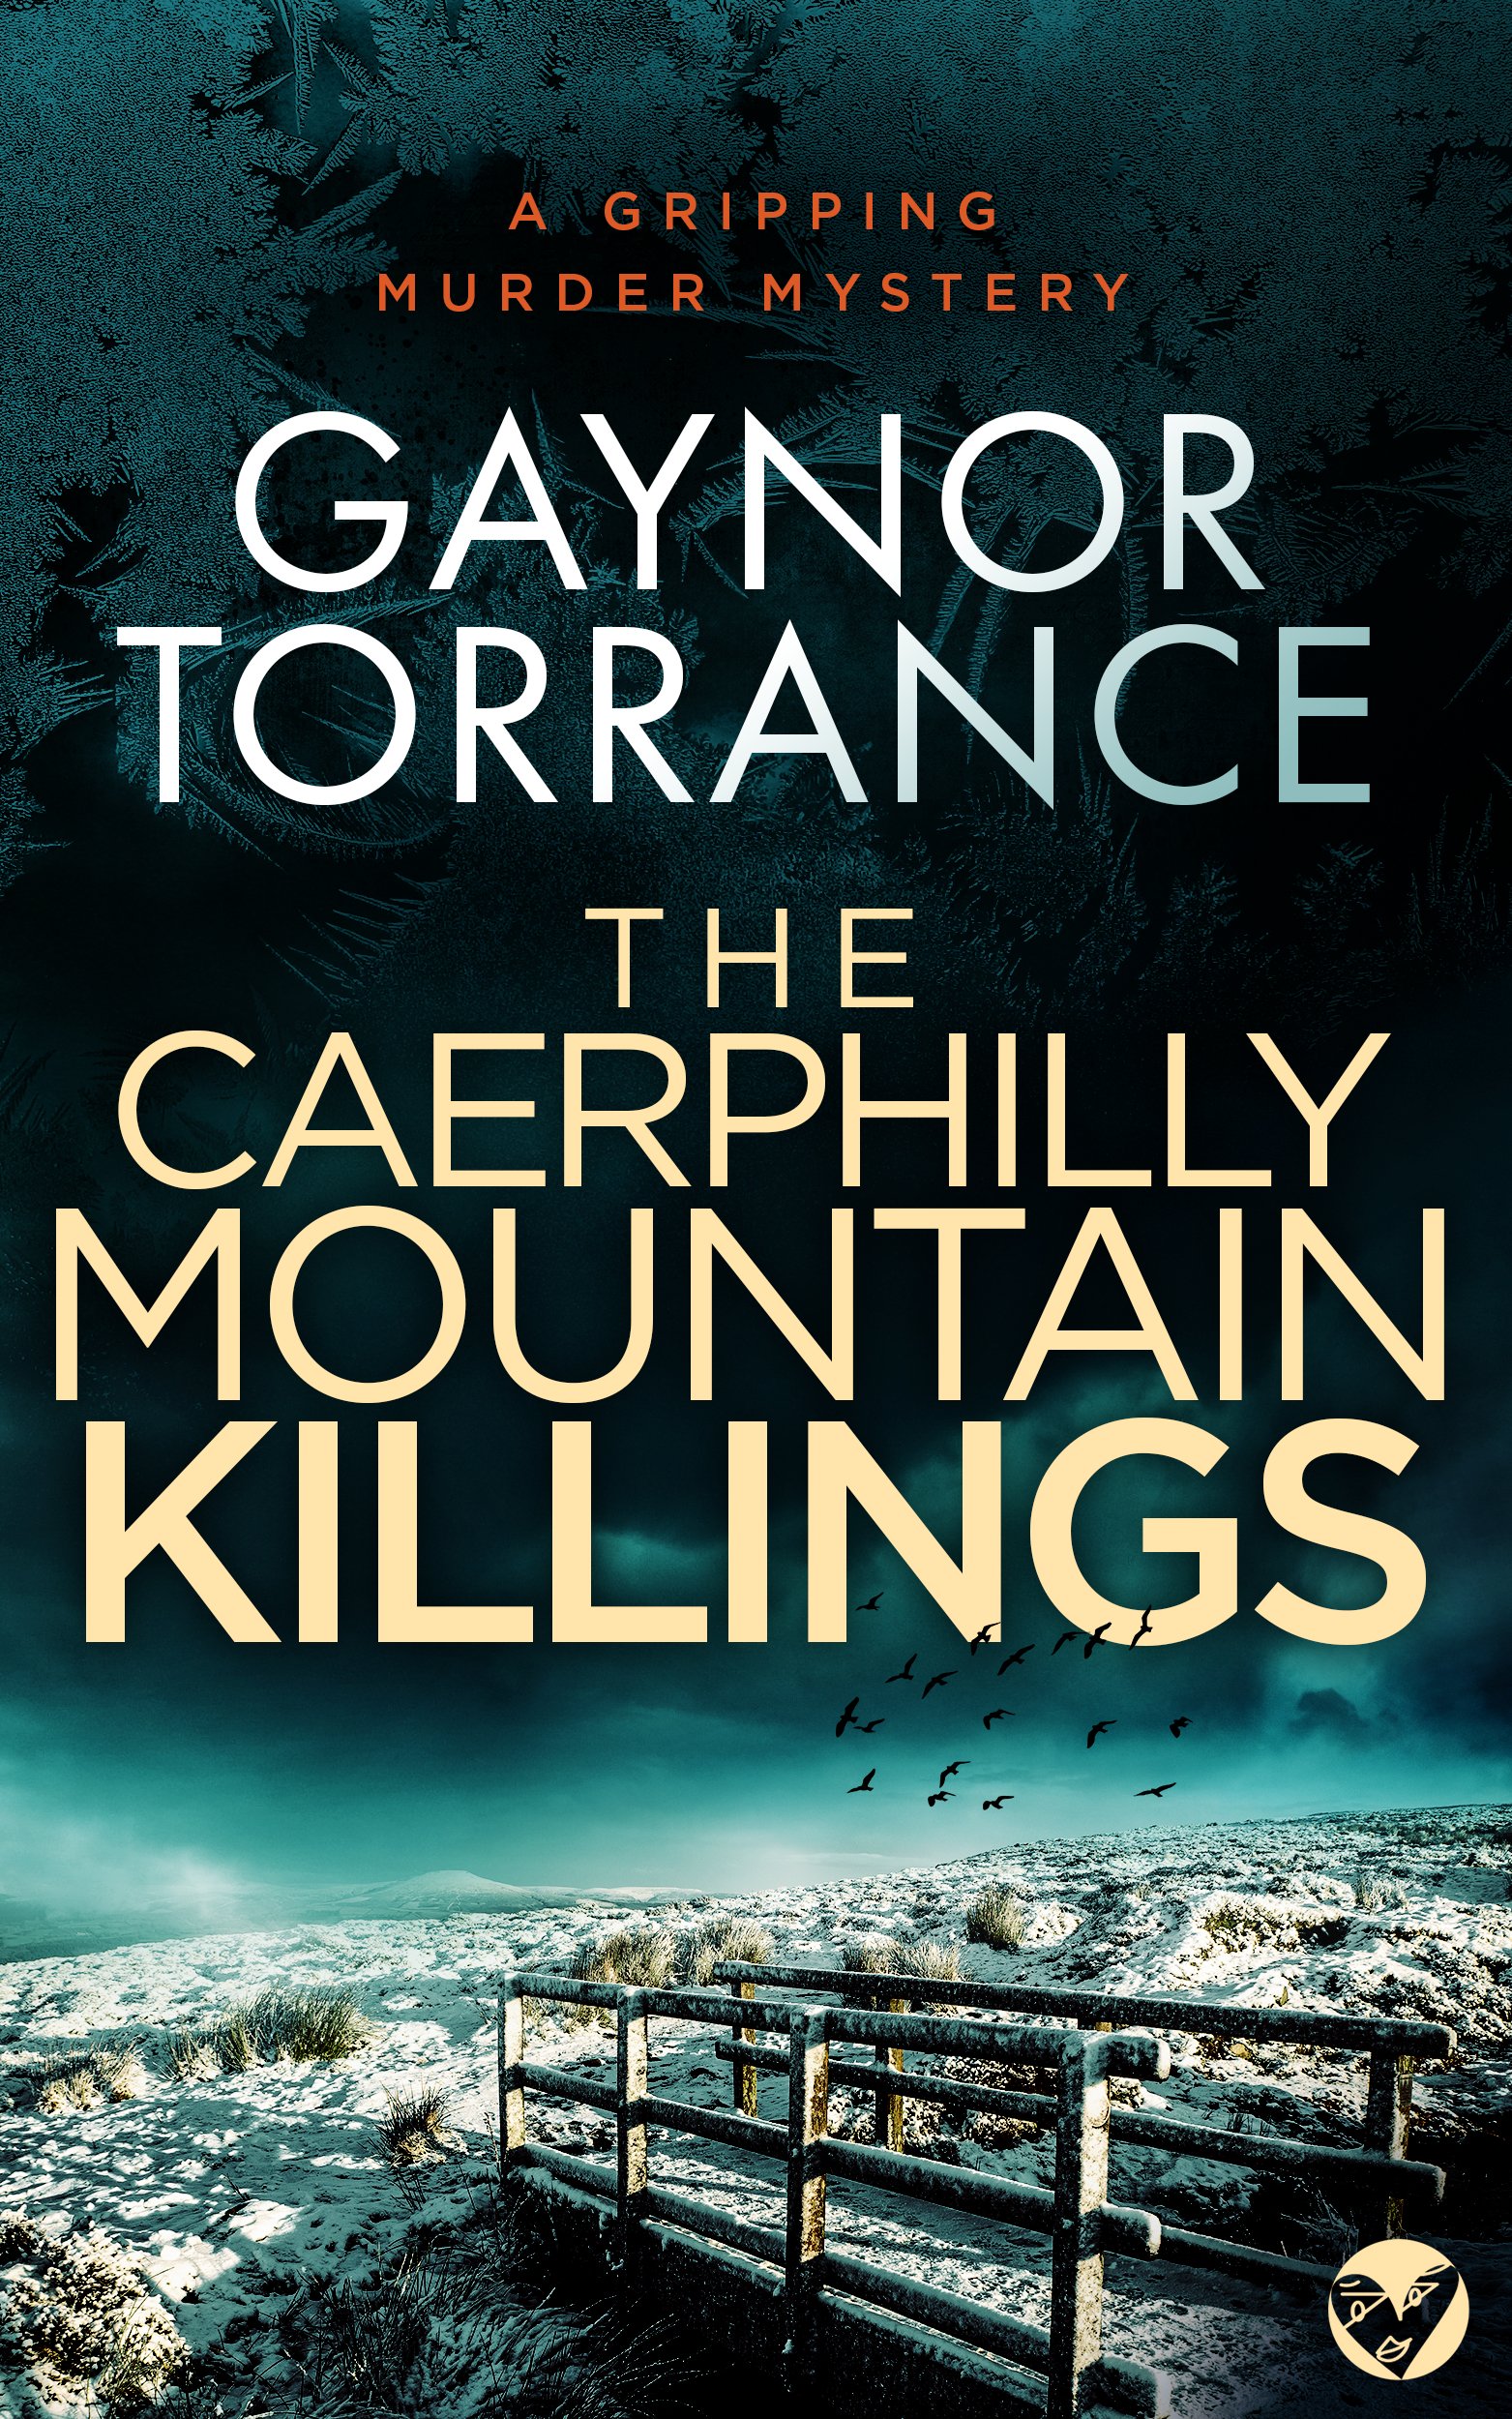 THE CAERPHILLY MOUNTAIN KILLINGS Cover publish.jpg